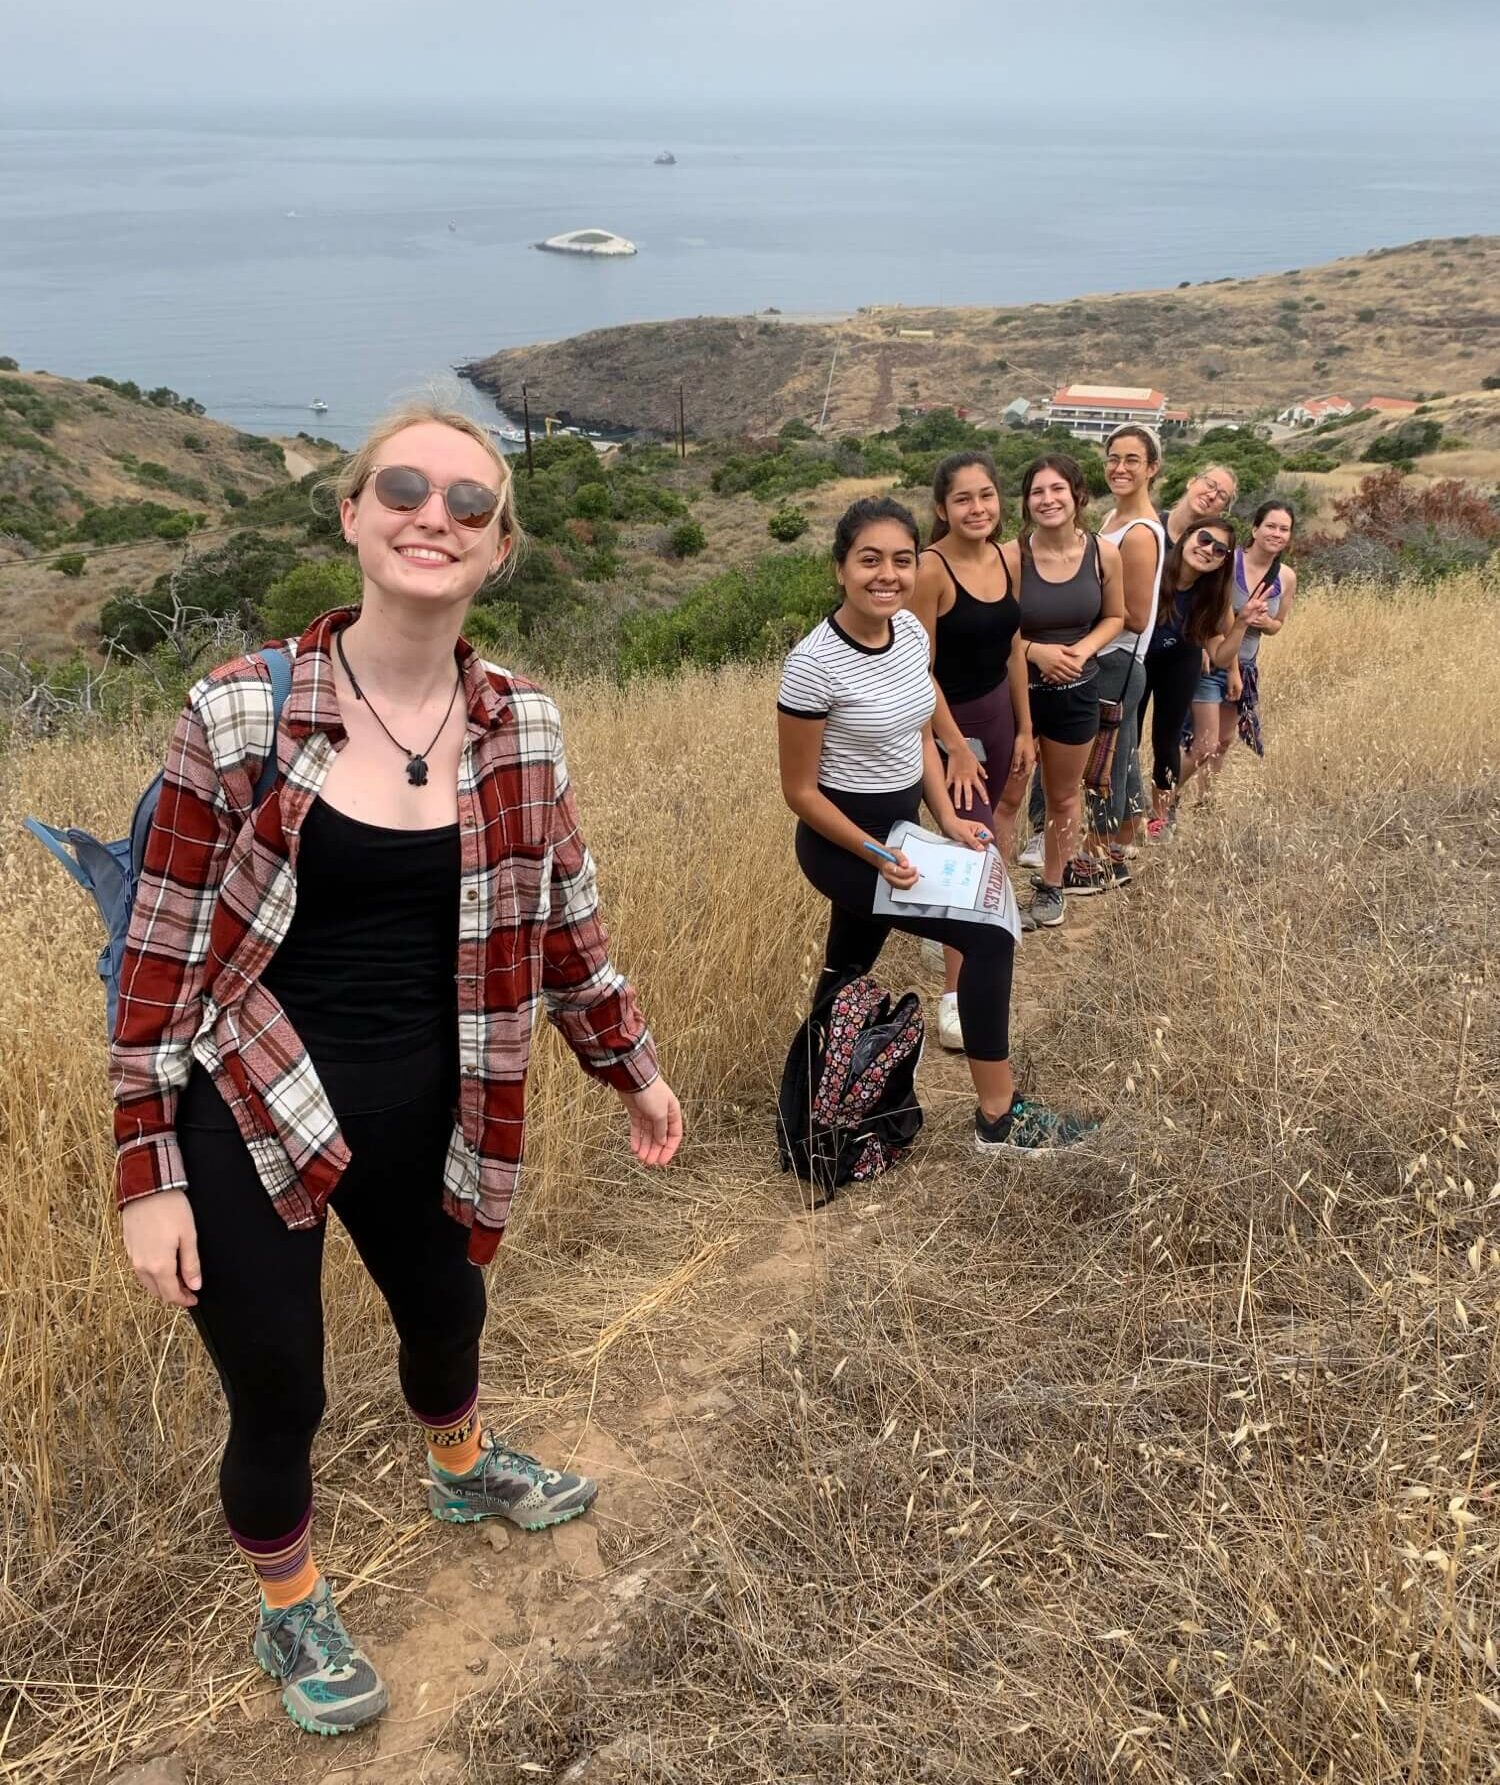 a line of Environmental Studies students stands in a field on a Catalina Island hillside with the ocean in the background